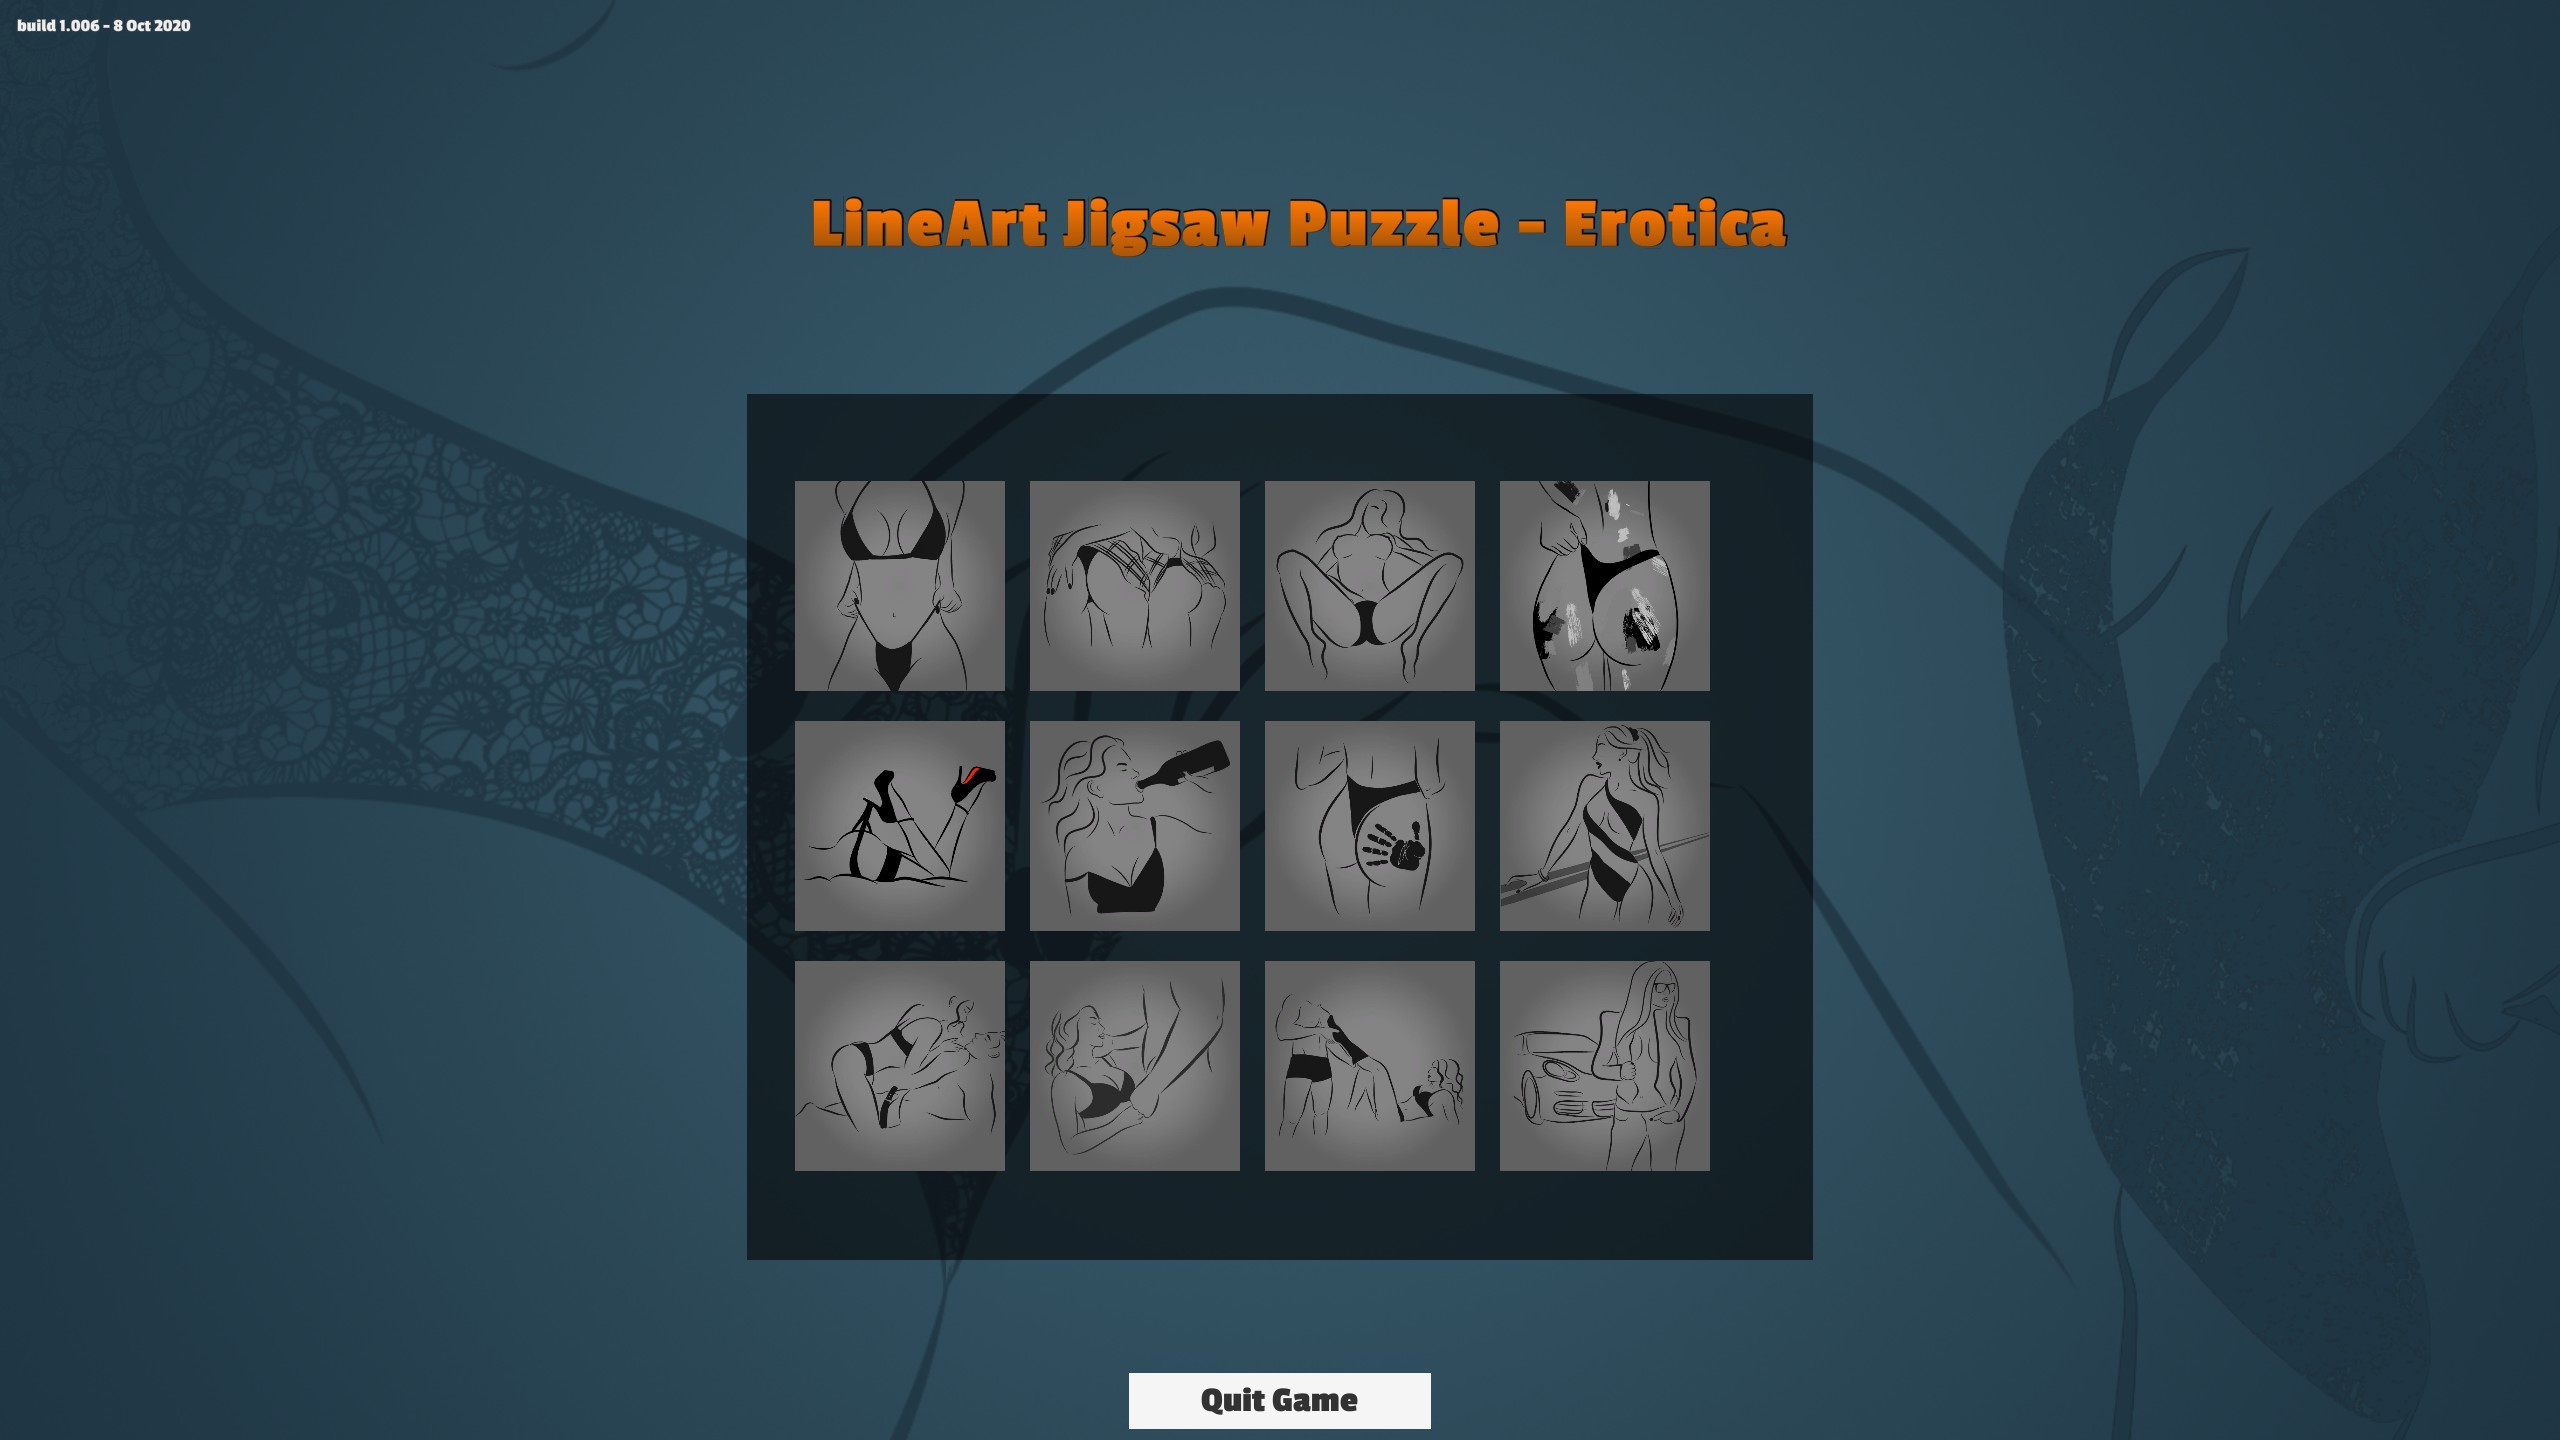 LineArt Jigsaw Puzzle - Erotica Steam CD Key 0.21$